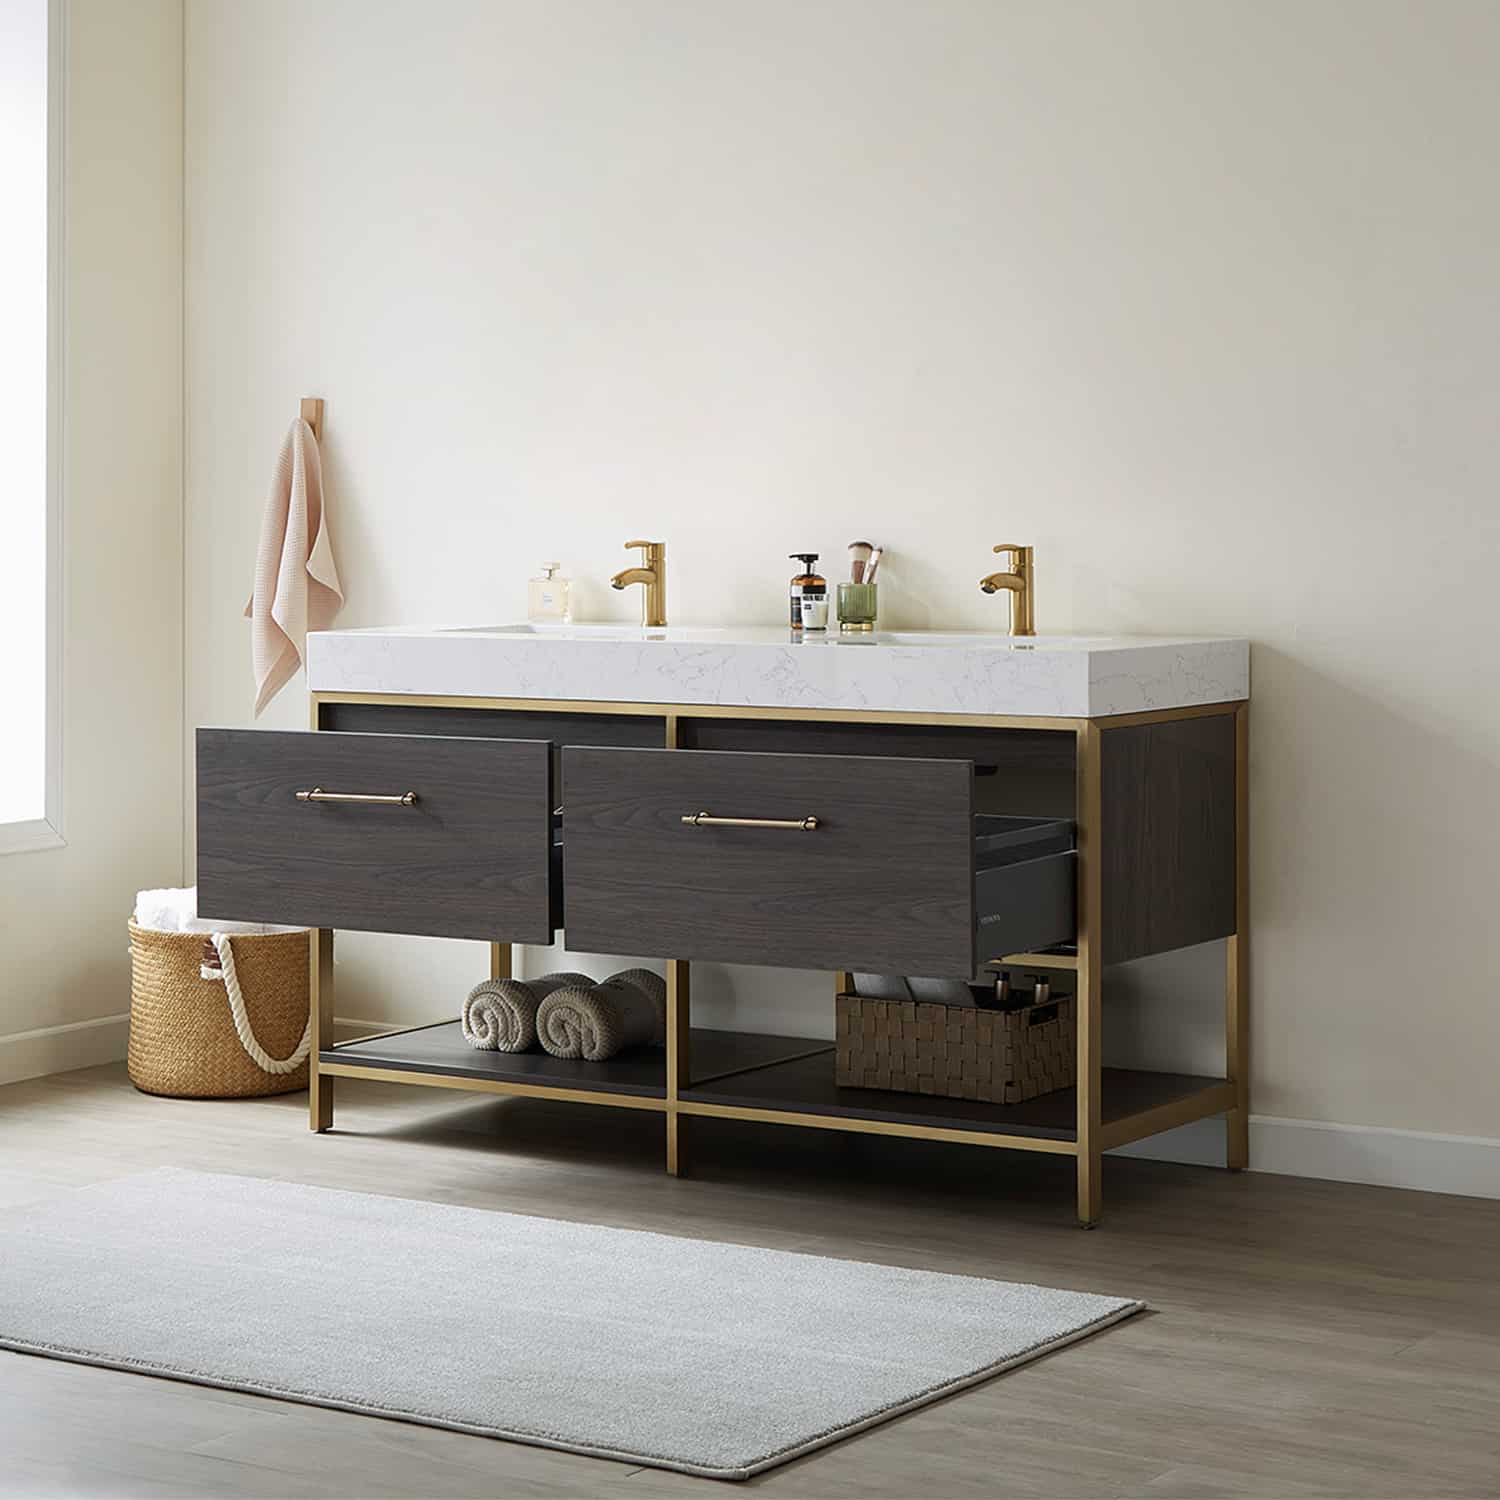 Vinnova Palma 60 Inch Freestanding Double Sink Bath Vanity in Suleiman Oak with White Composite Grain Stone Without Mirror Drawers 701260G-SO-GW-NM